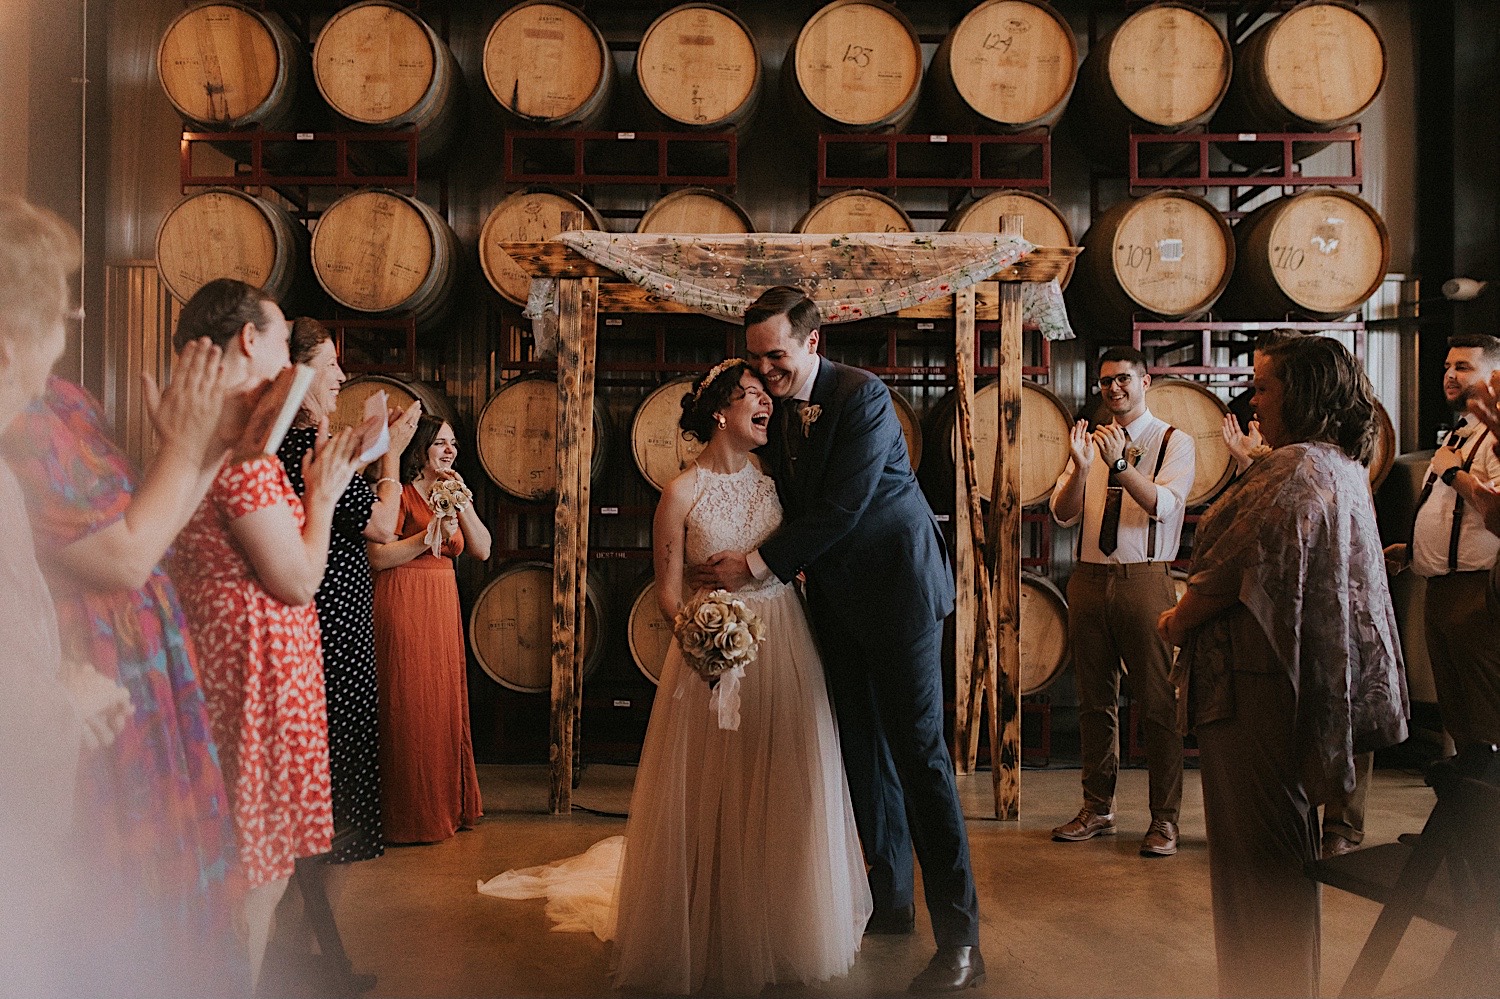 A bride and groom hug one another while exiting their wedding ceremony at their venue, The Barrel Room at the Destihl Brewery in Central Illinois